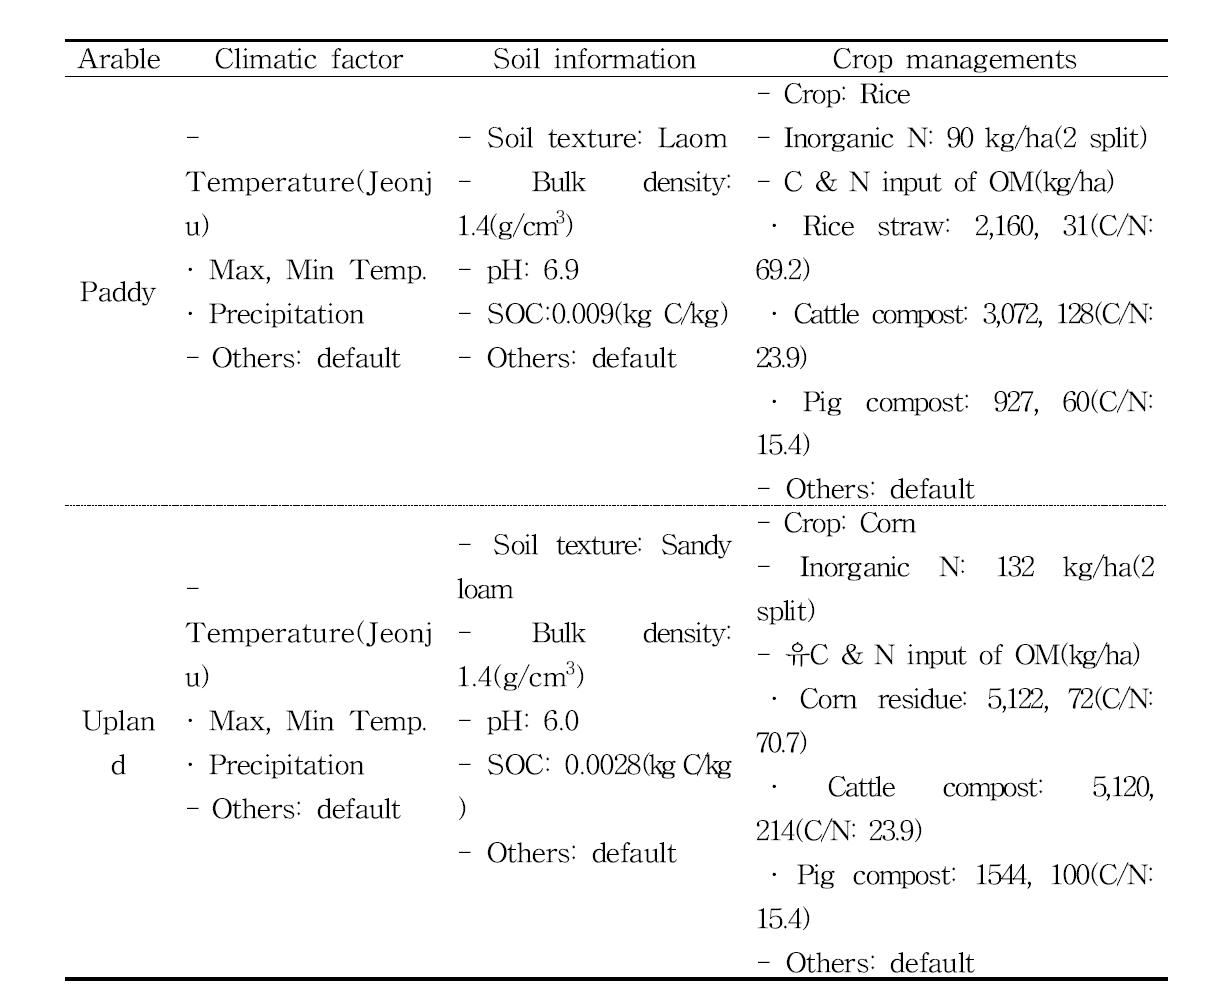 Summary of characteristics for long-term experiments and required parameters to run the DNDC model